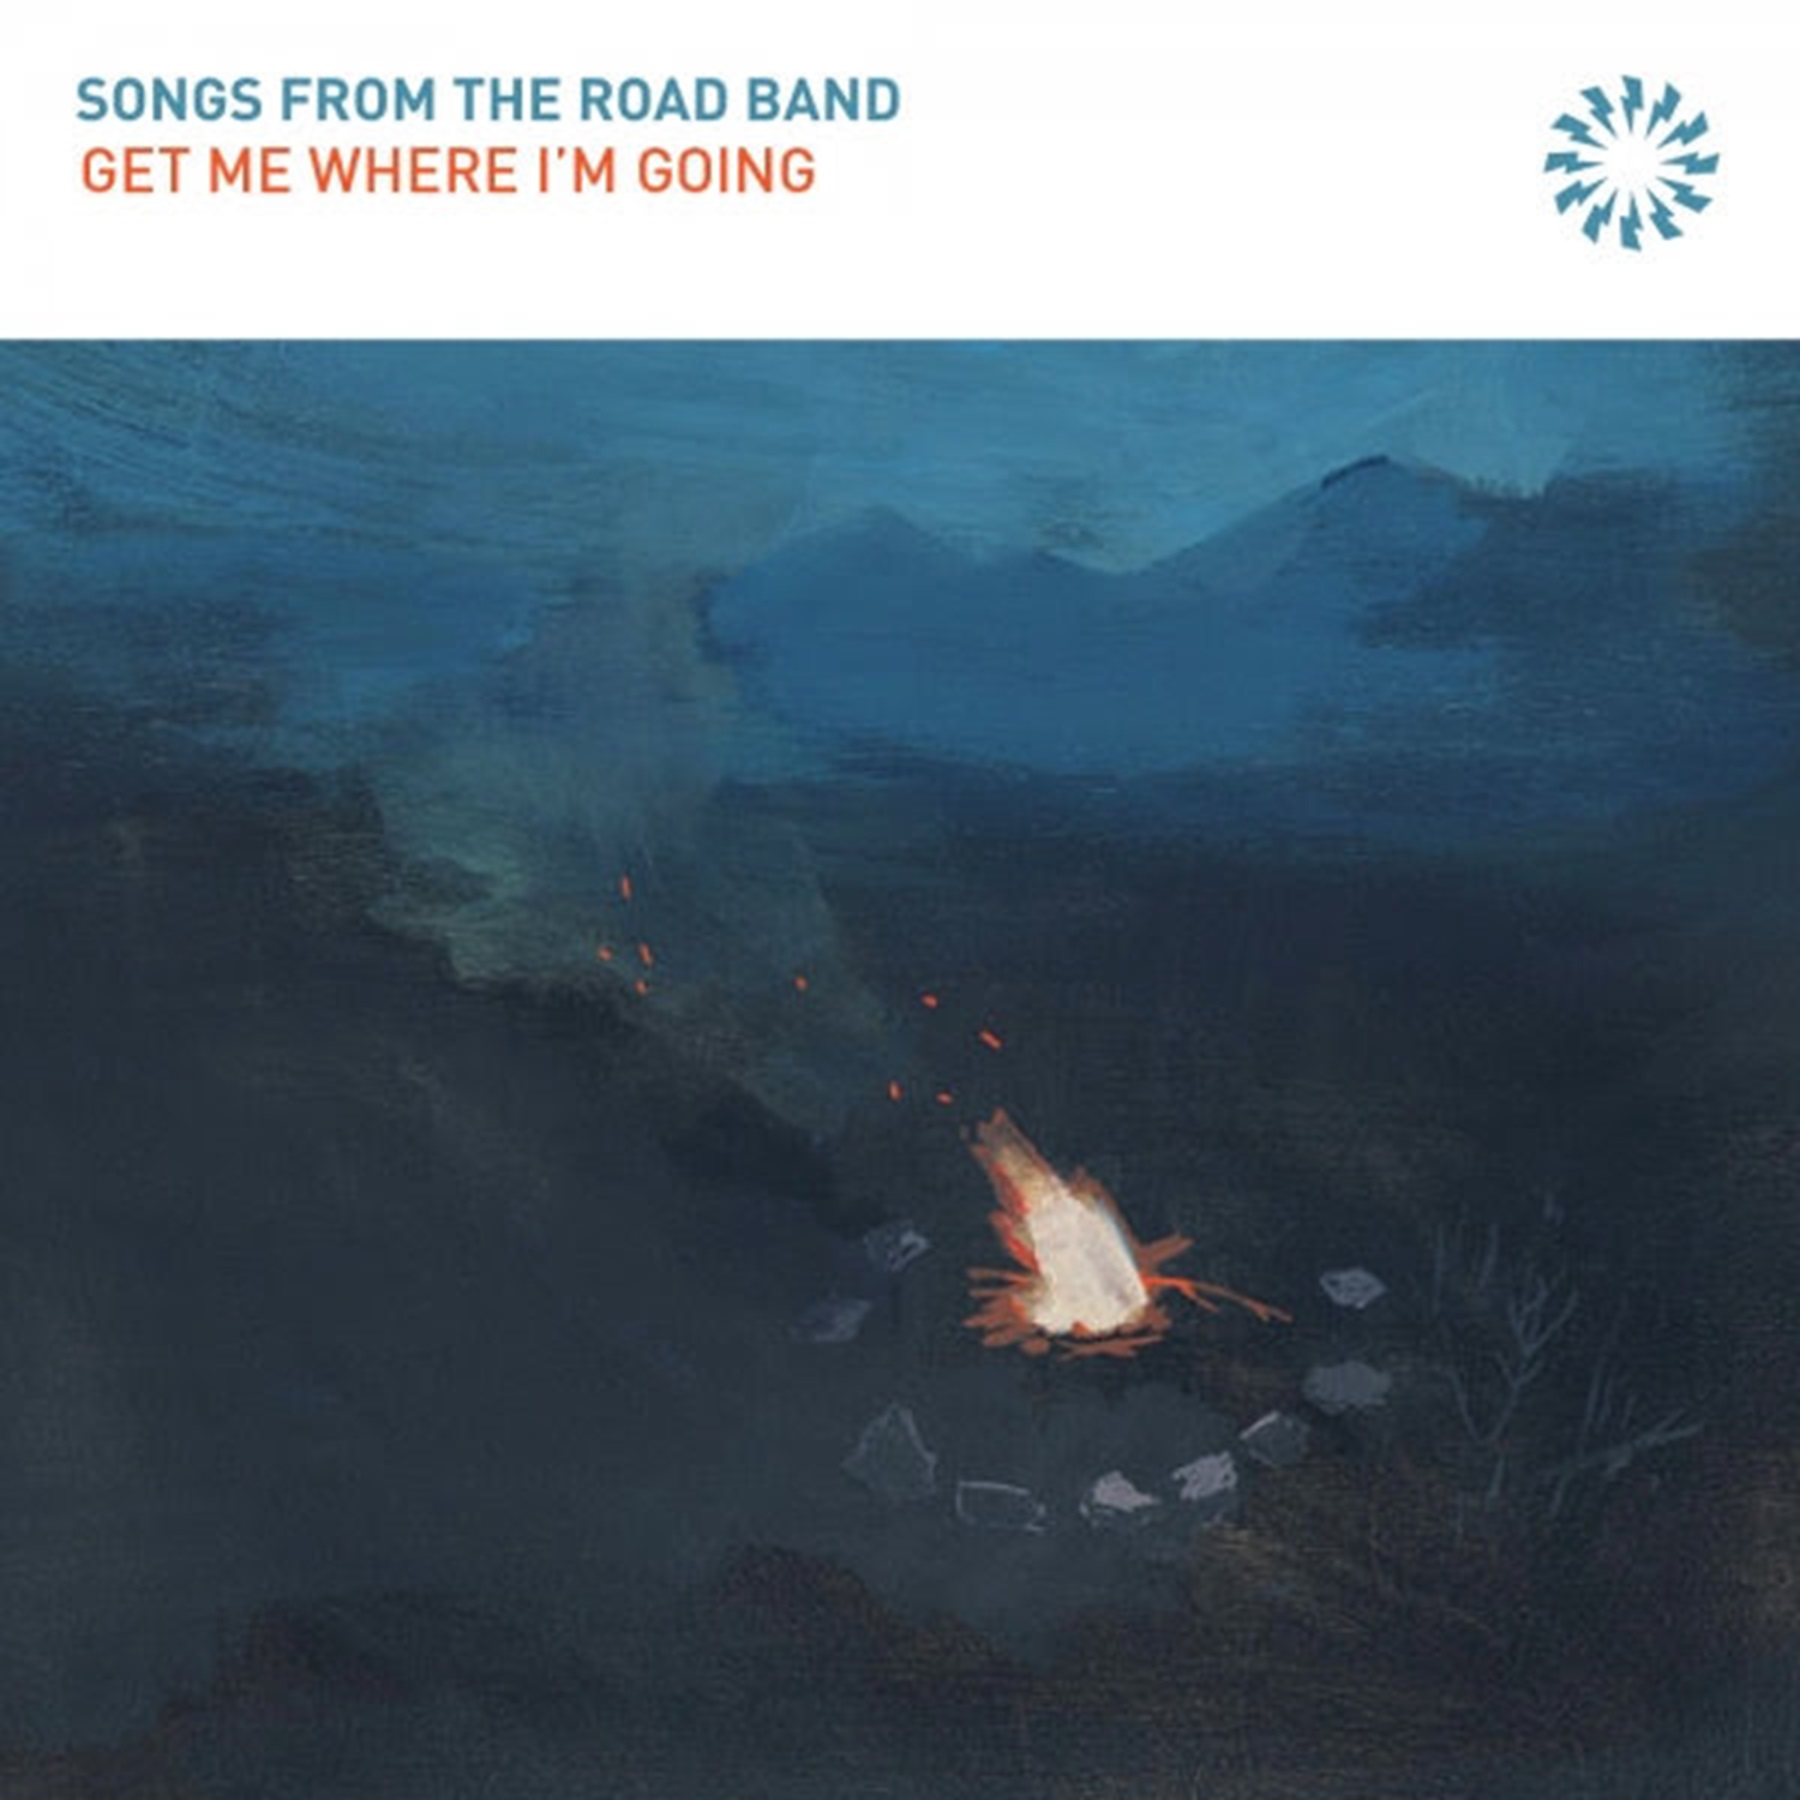 Songs From the Road Band Releases New Single: "Get Me Where I'm Going"